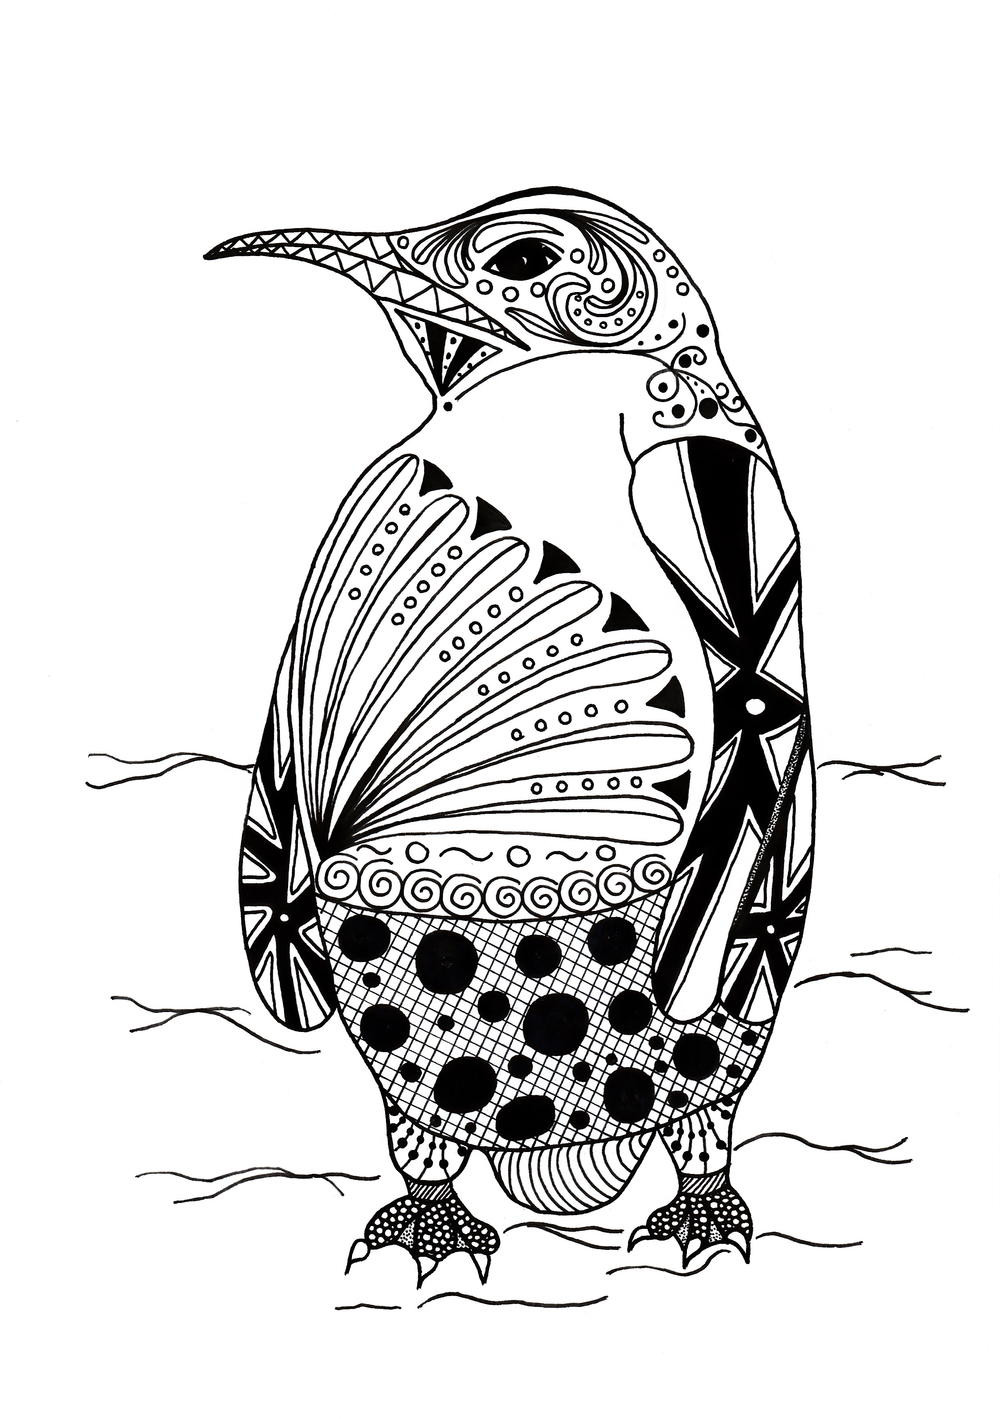 Coloring Sheet For Adults
 Intricate Penguin Adult Coloring Page